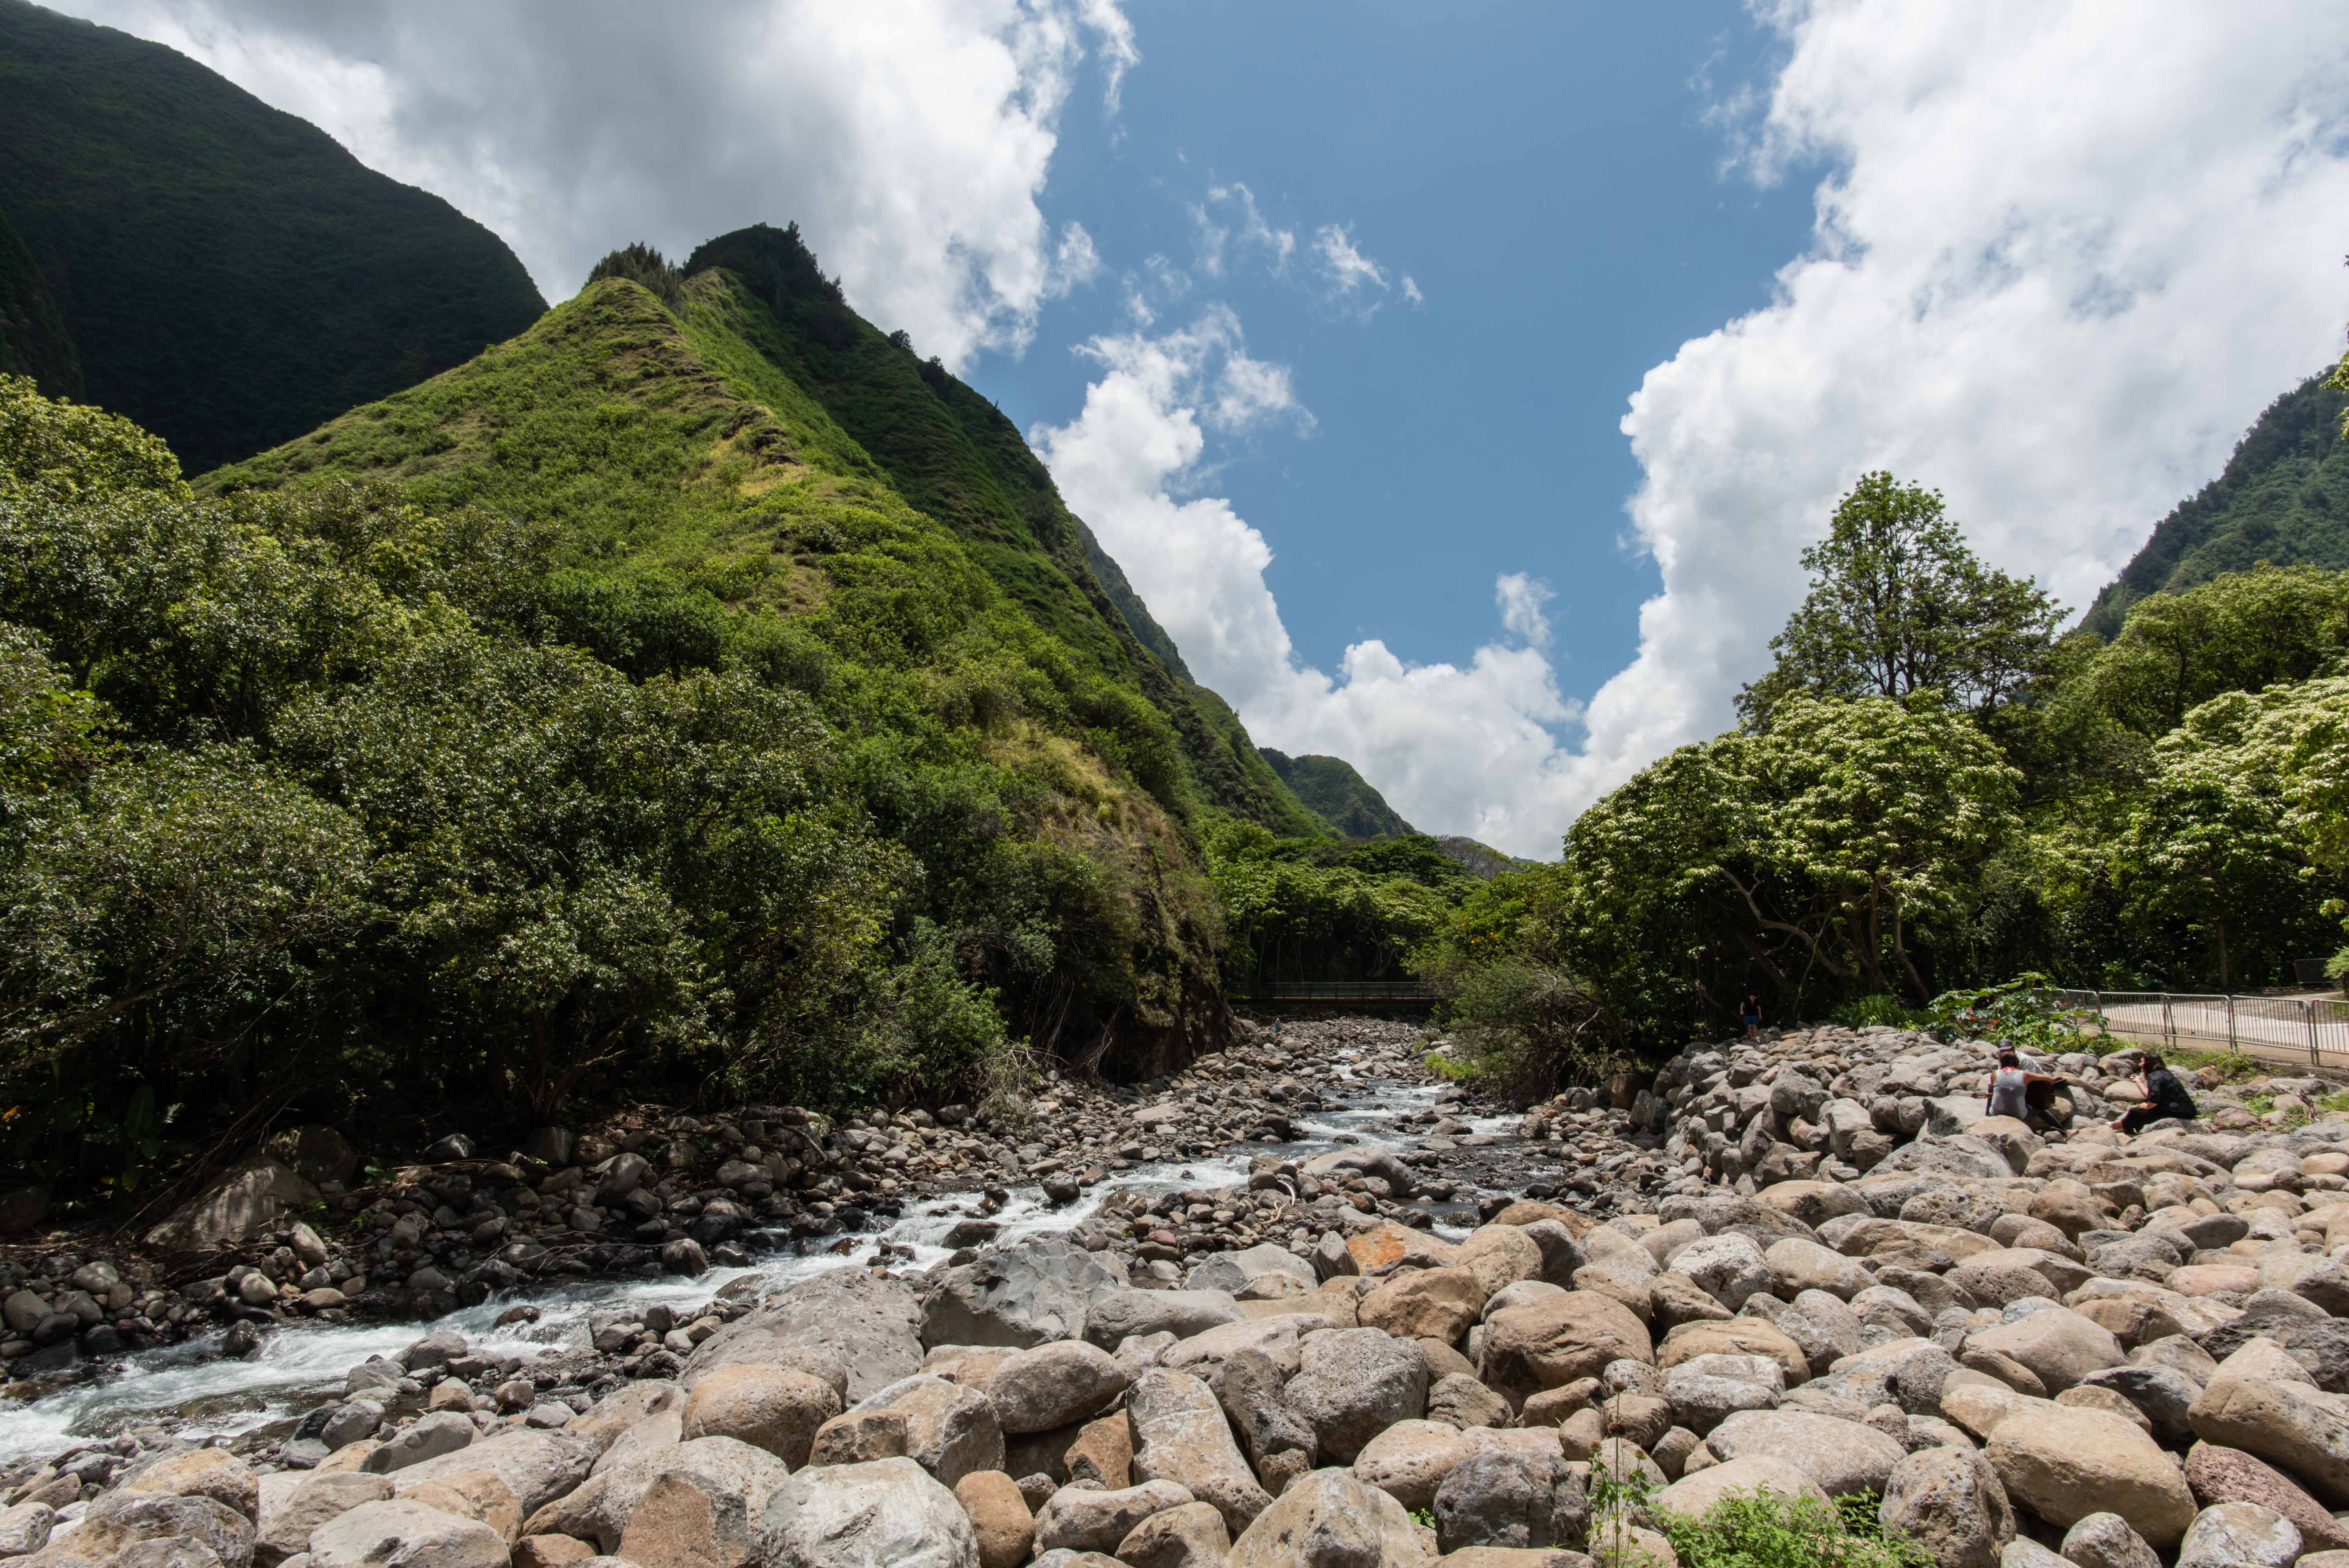 Iao Valley State Park Image